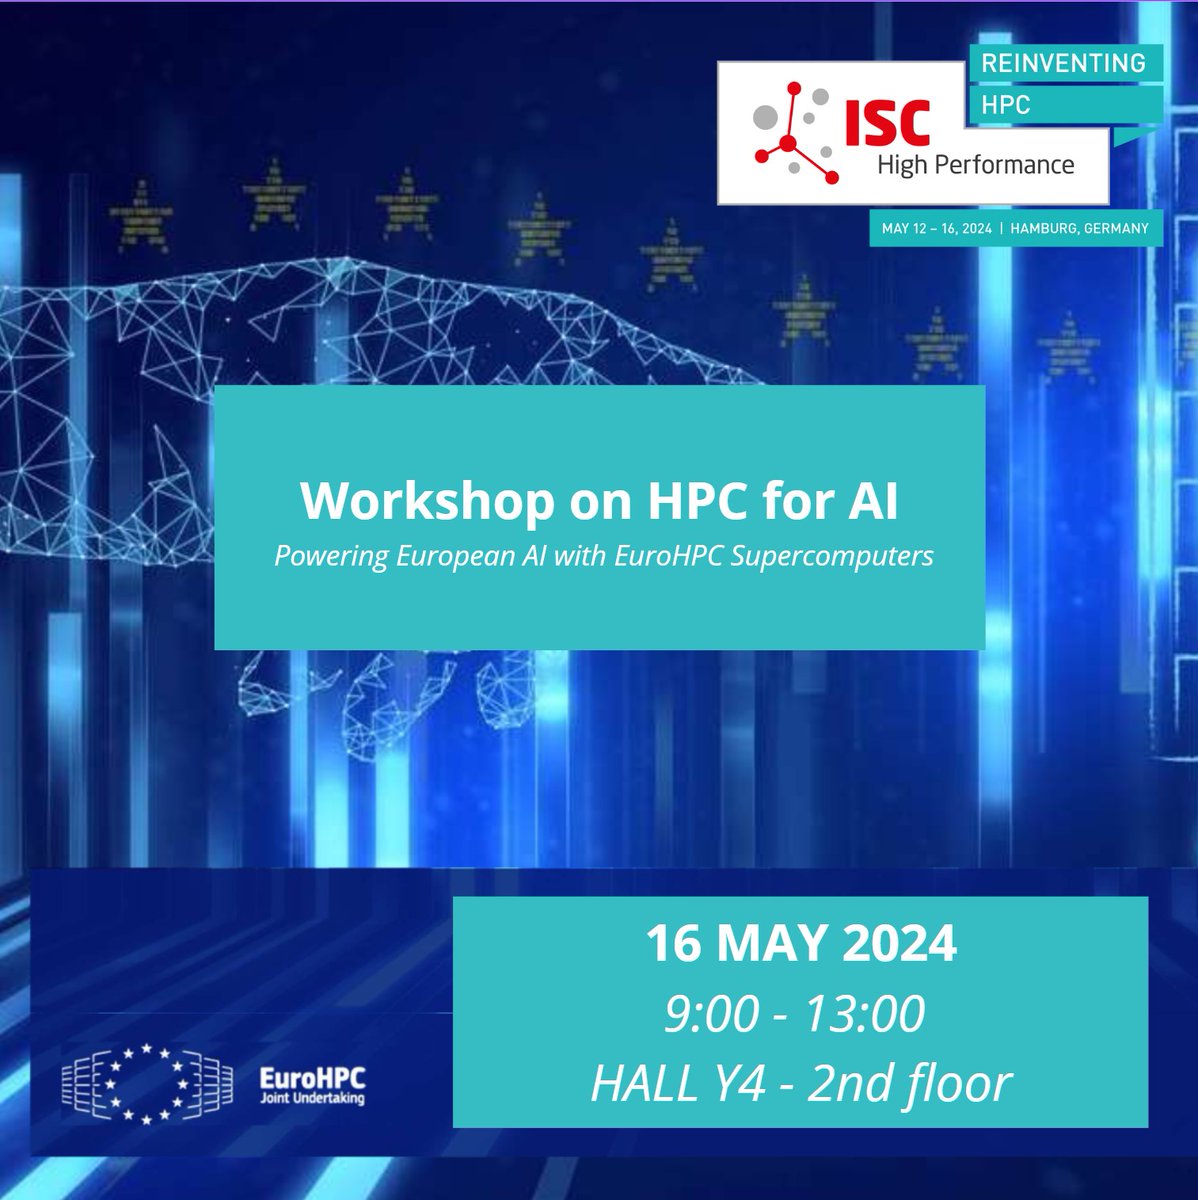 Don't miss the opportunity to hear all about the AI initiatives of the @EuroHPC_JU Join our ISC workshop 'Powering European AI with EuroHPC Supercomputers' 📆Thursday 16 May 2024 ⏰ 9h00 to13h00 📍 Hall Y4 - 2nd Floor We look forward to meeting you! eurohpc-ju.europa.eu/news-events/ev…